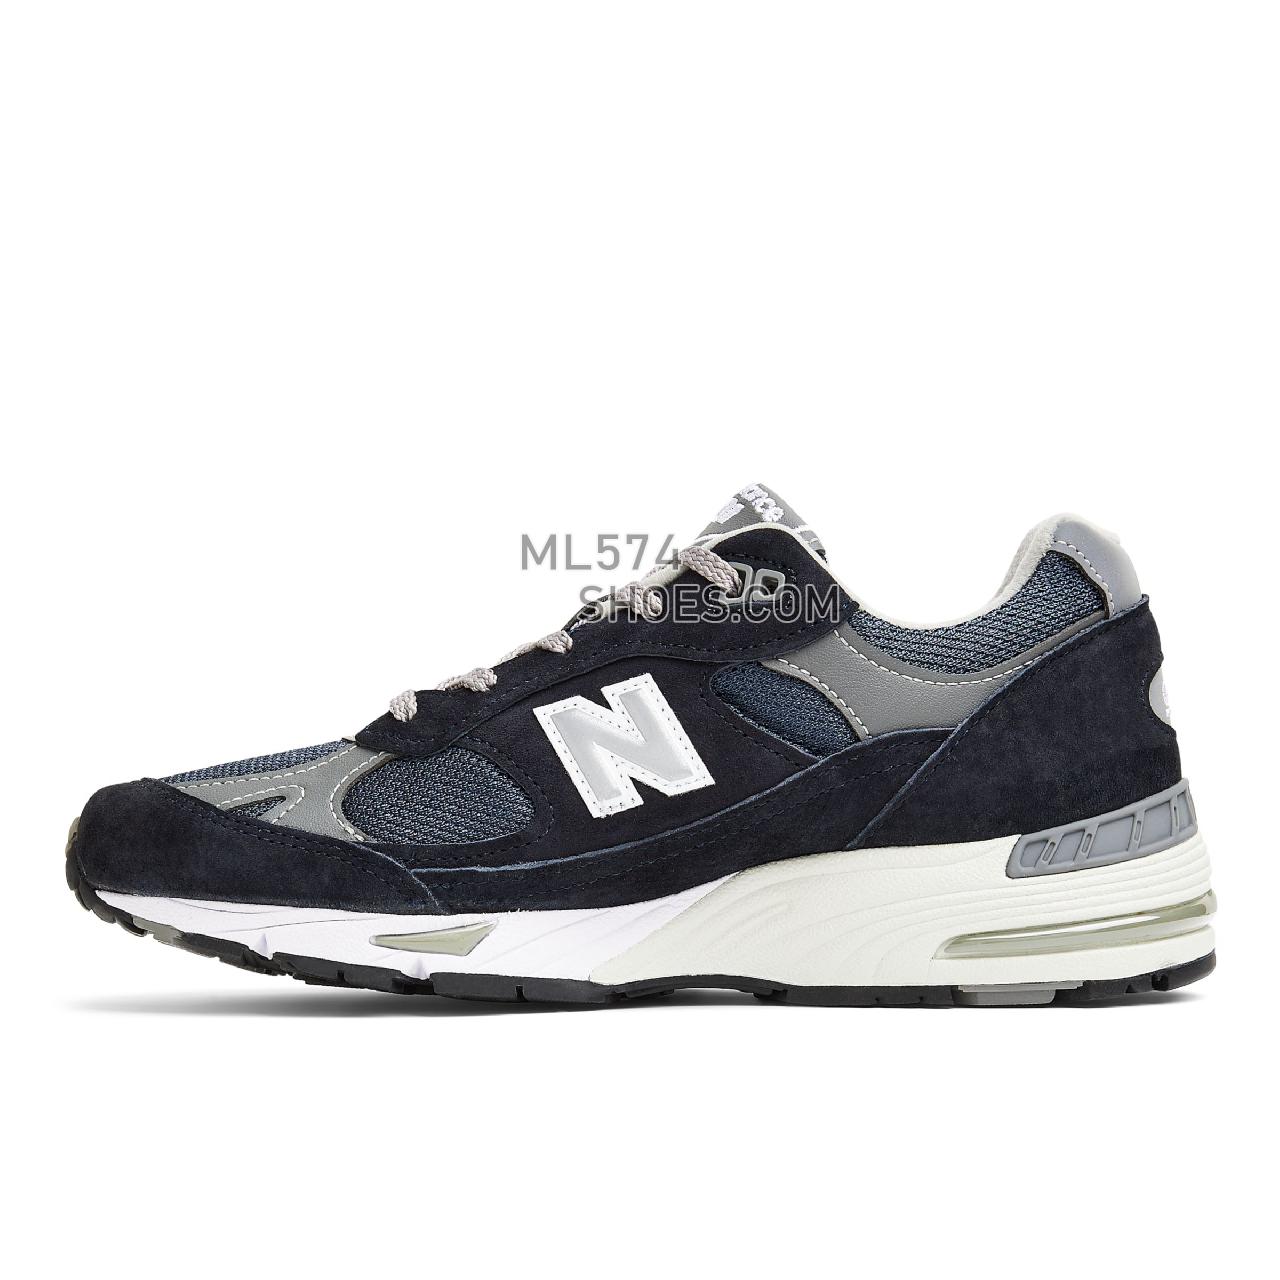 New Balance Made in UK 991 - Women's Classic Sneakers - Navy with White and Silver - W991NV